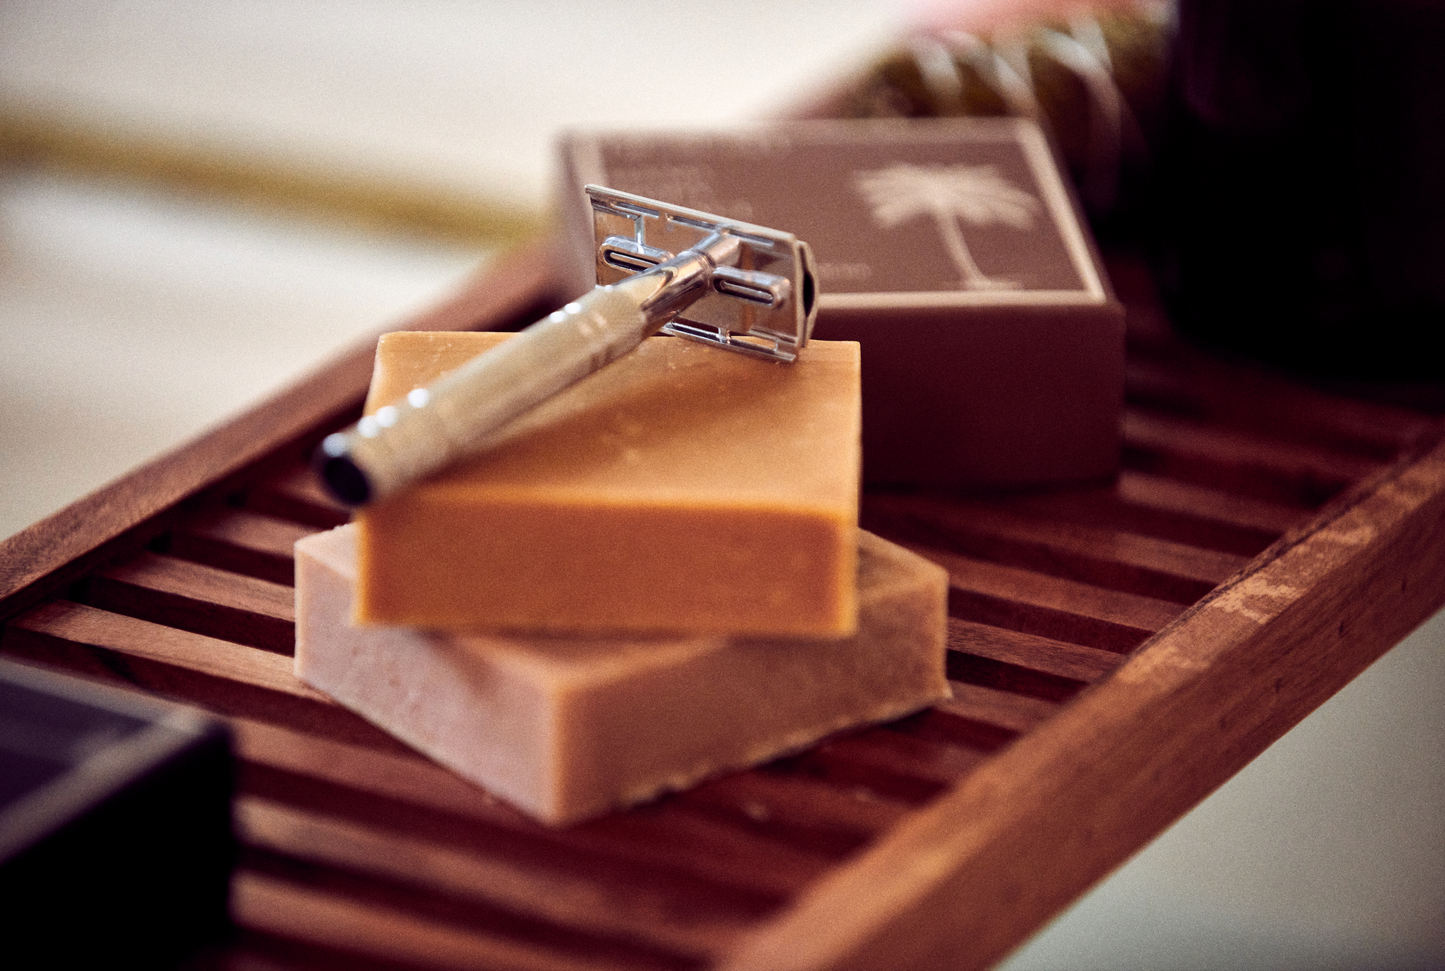 This image shows the Desesh premium quality solid body and face shave soap bar as an alternative to cans of shave foam or cream. This is a more eco friendly sustainable zero waste option and the shave bars come in biodegradable packaging. Shown here is the metal safety razor and two of the solid shave soap bars